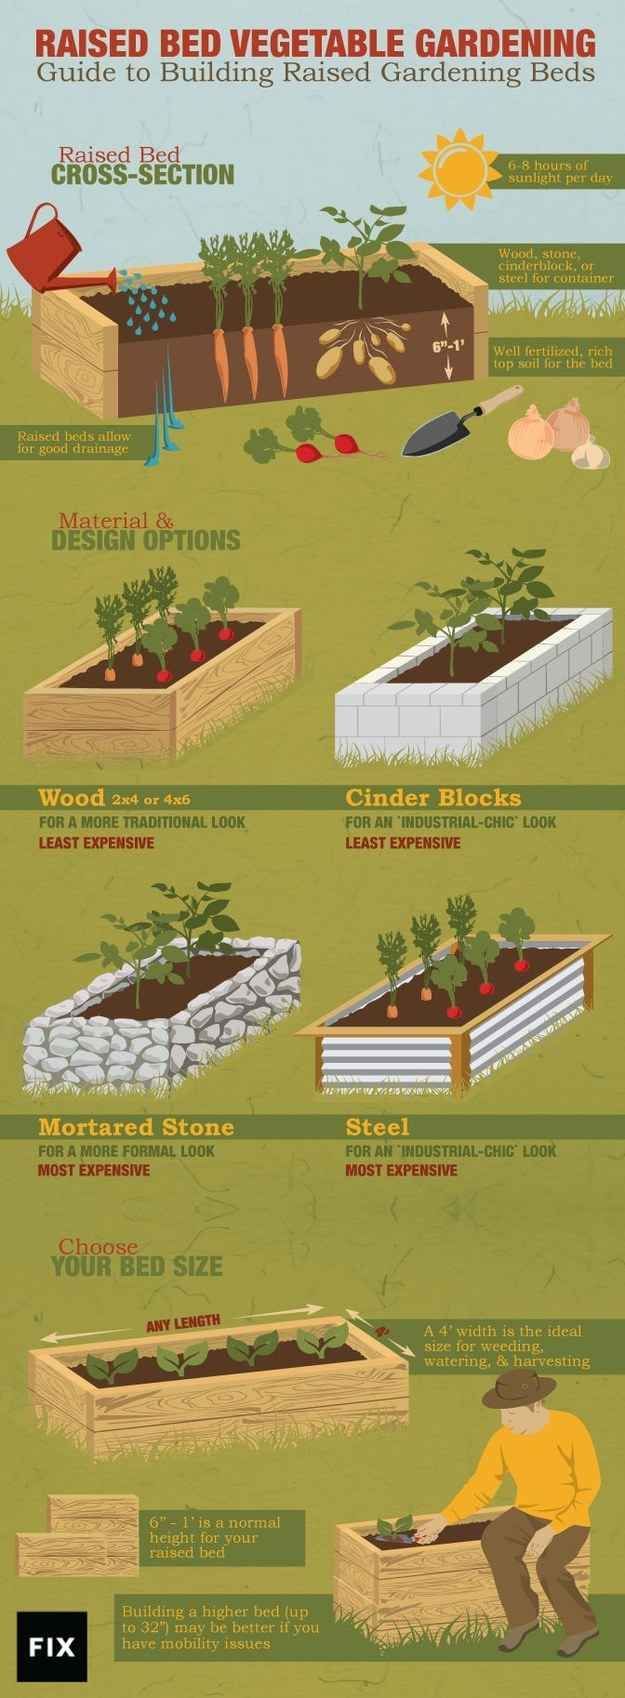 Raised gardening beds keep vegetables away from contaminated soil, can deter some pests, and are easier on backs and